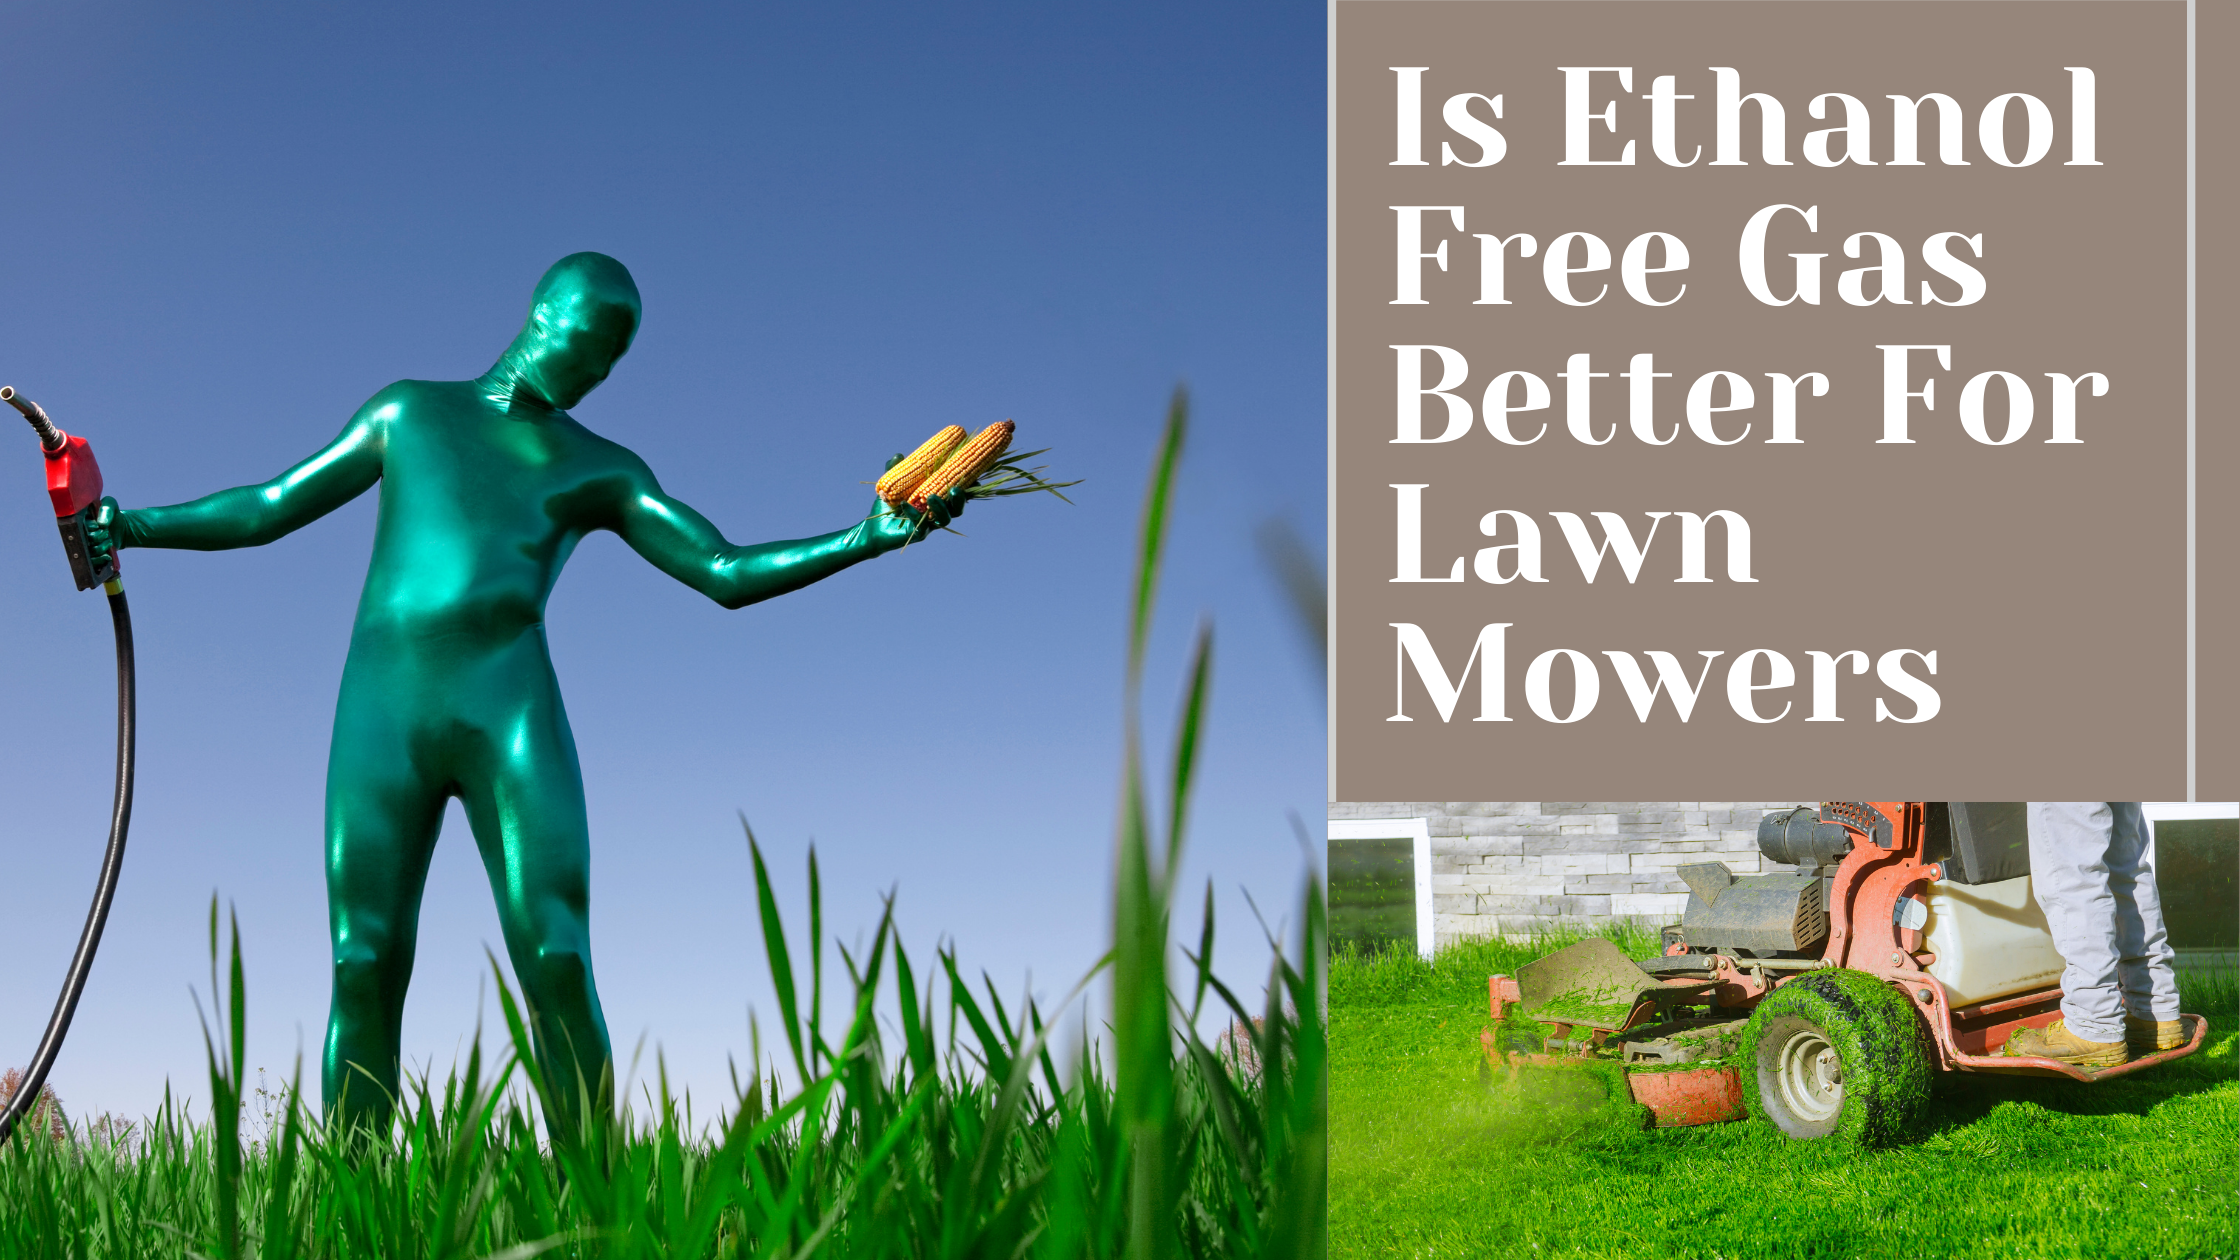 Is Ethanol Free Gas Better For Lawn Mowers